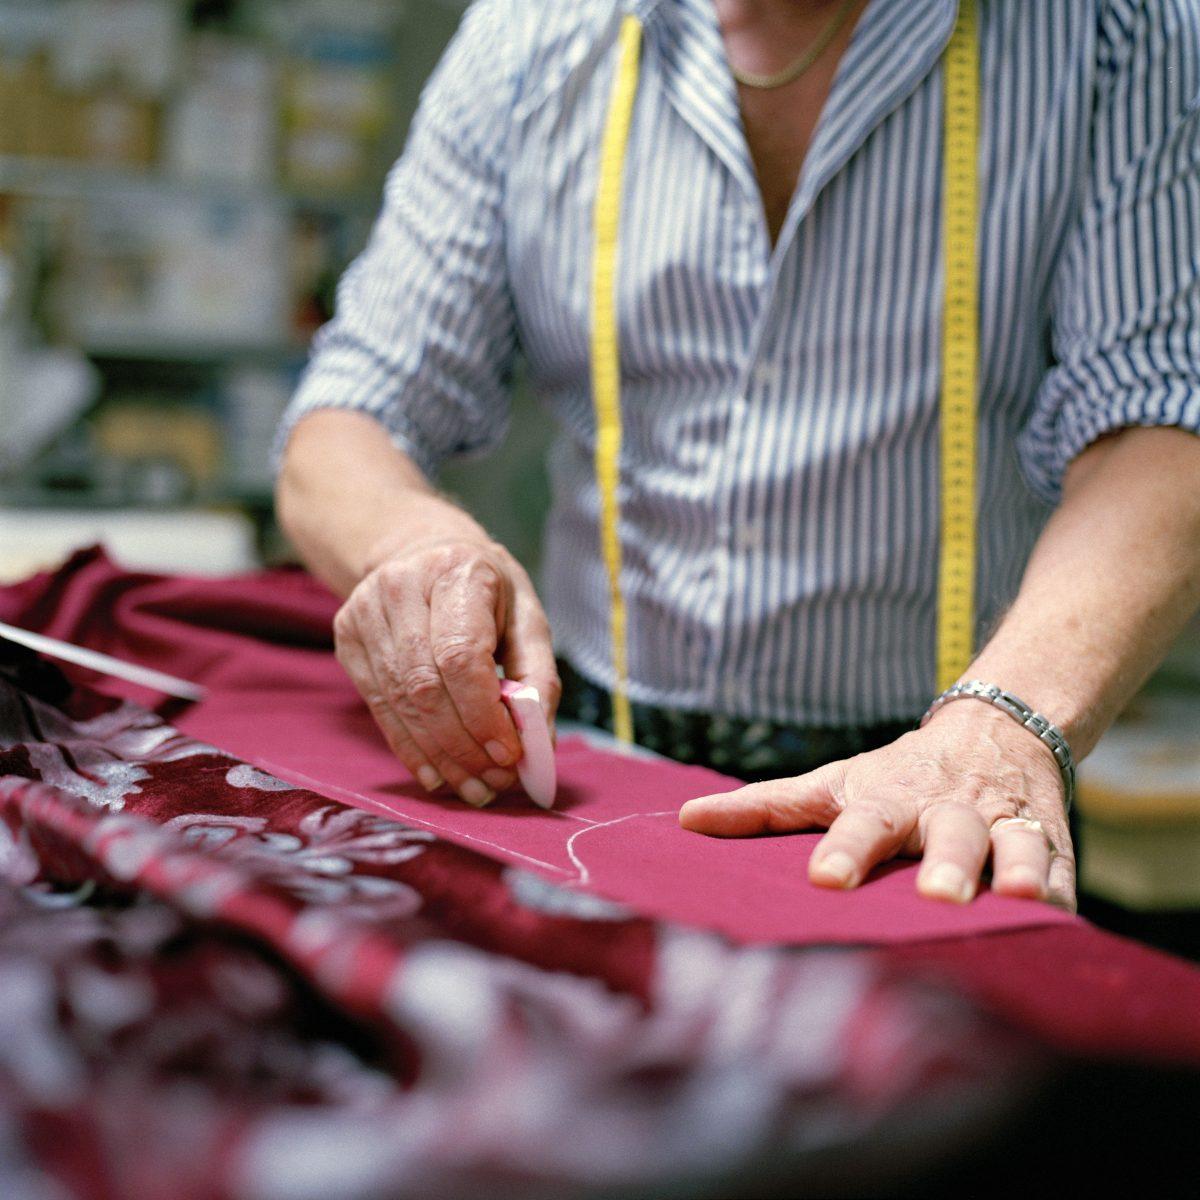 The tailors at Atelier Nicolao produce traditional period-costumes for opera houses, theaters, ballets, television, and movies around the world. (Susanna Pozzoli/Michelangelo Foundation for Creativity and Craftsmanship)